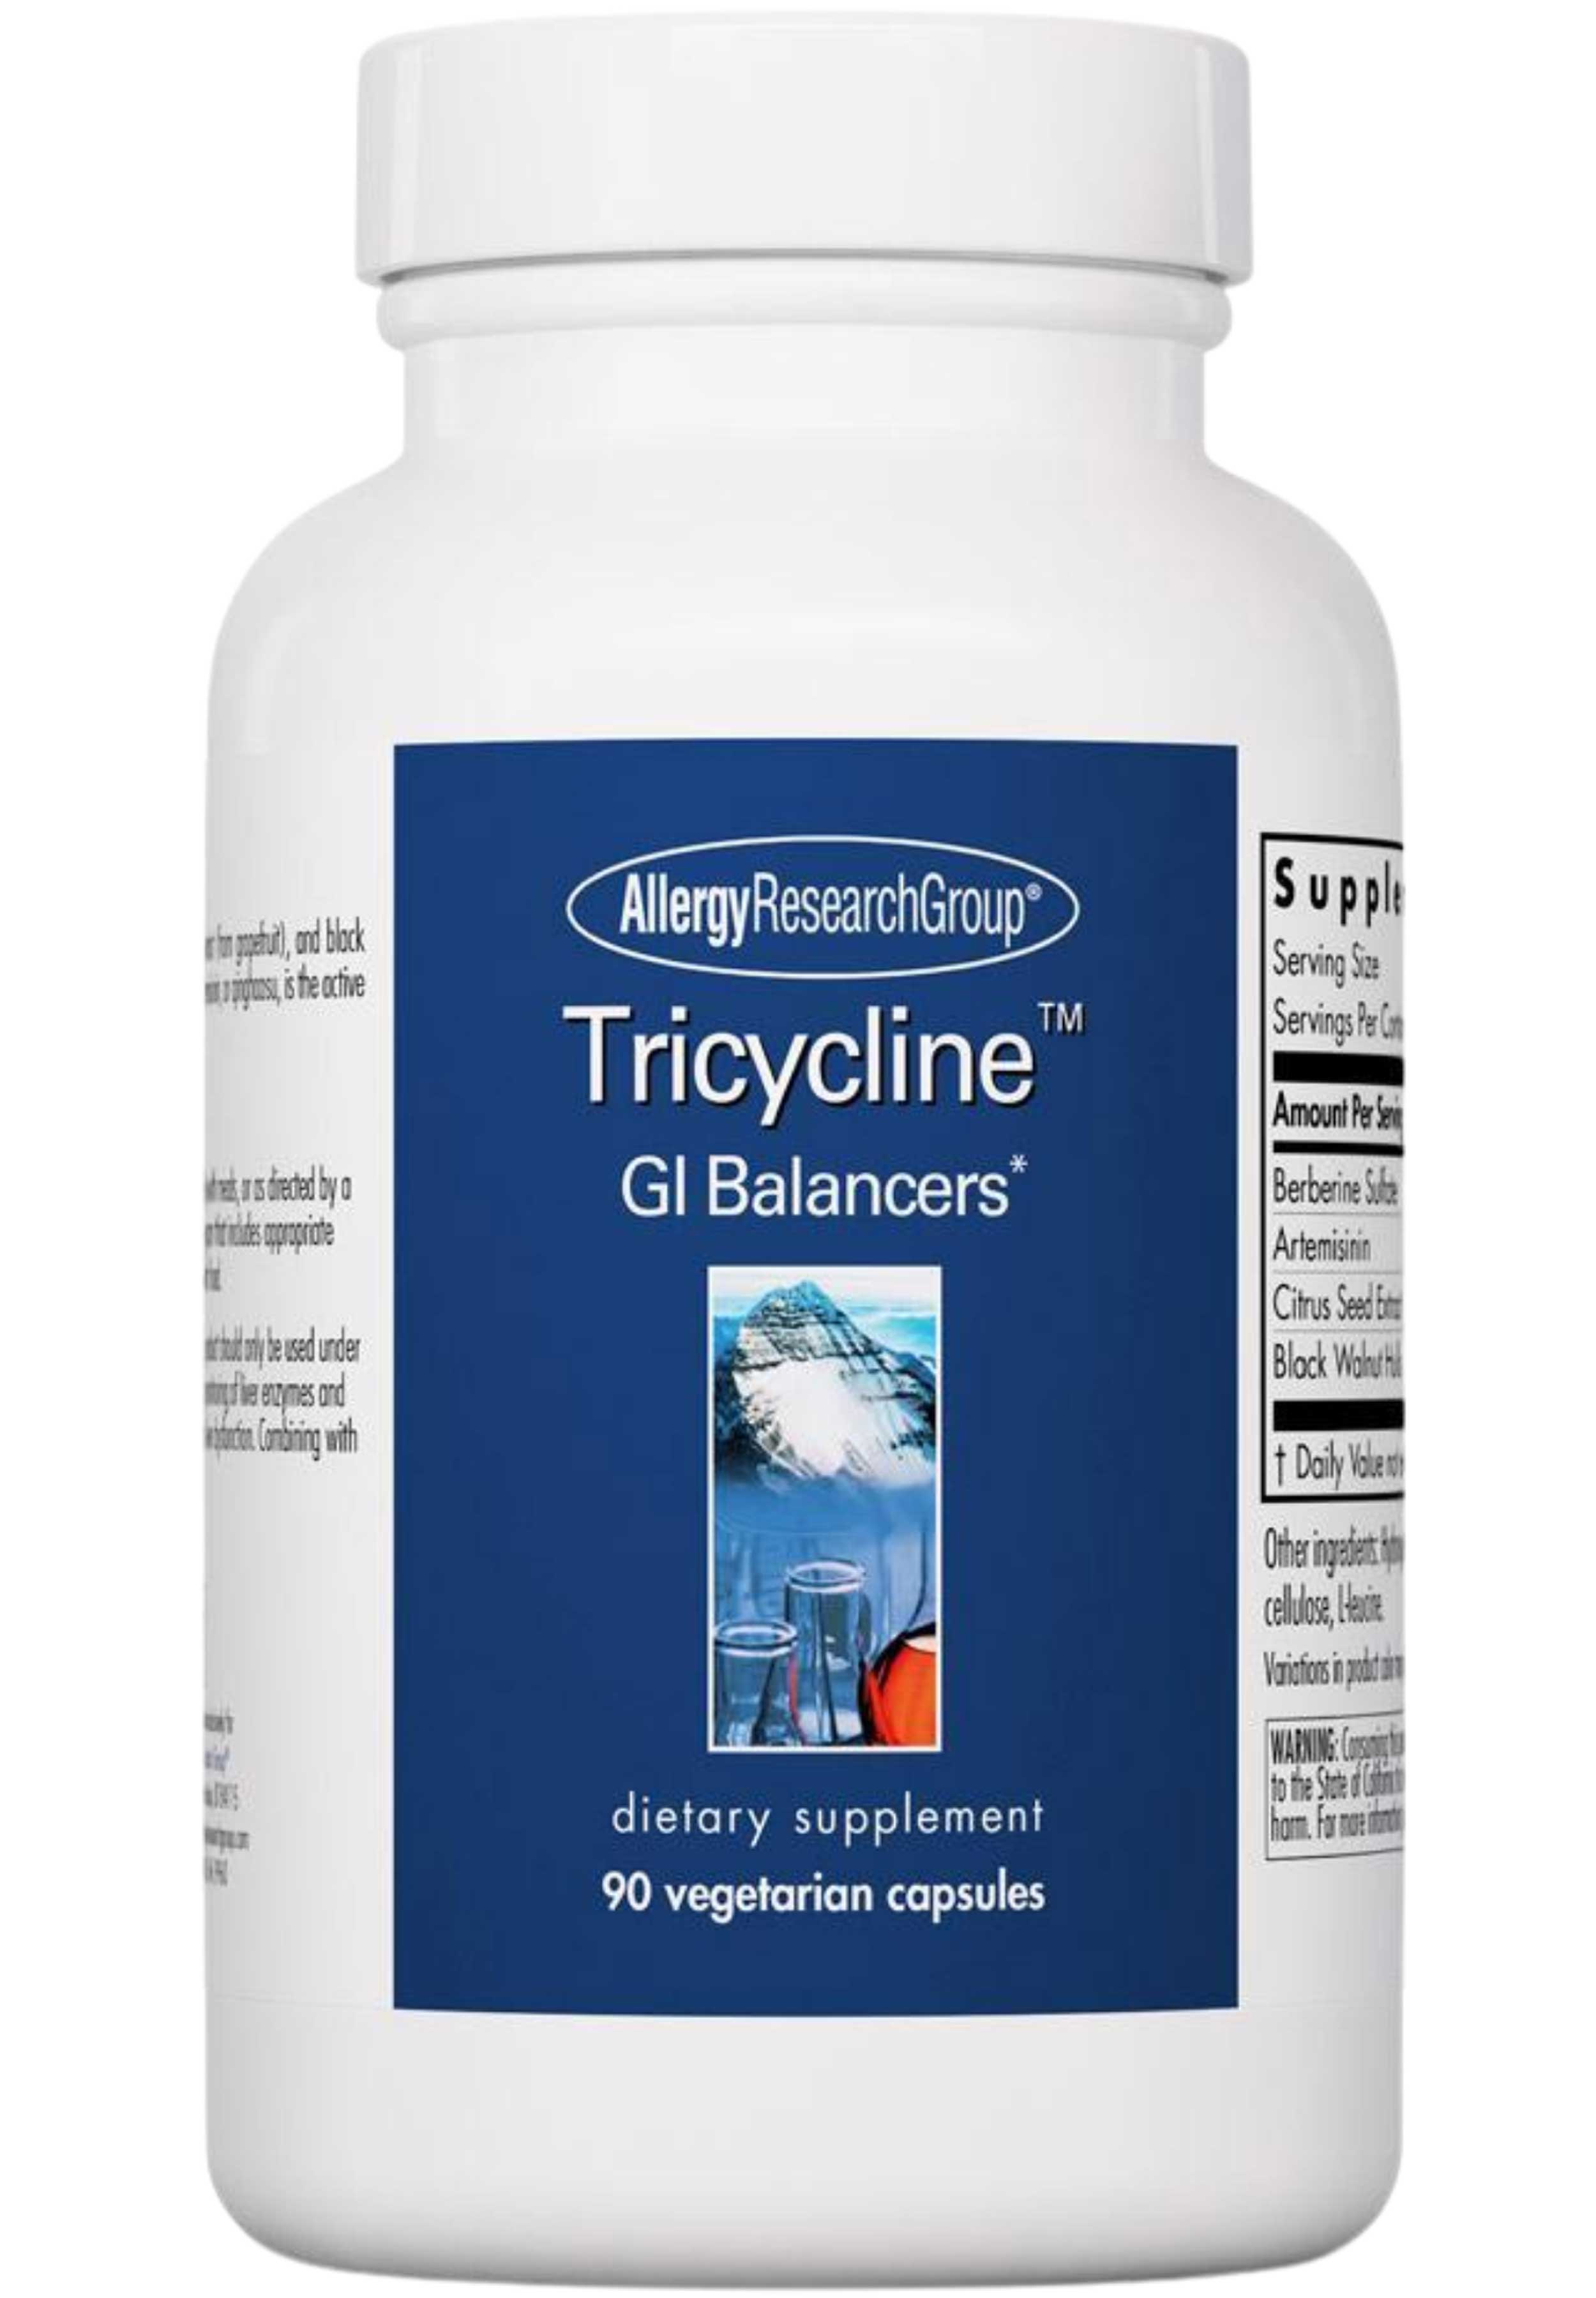 Allergy Research Group Tricycline